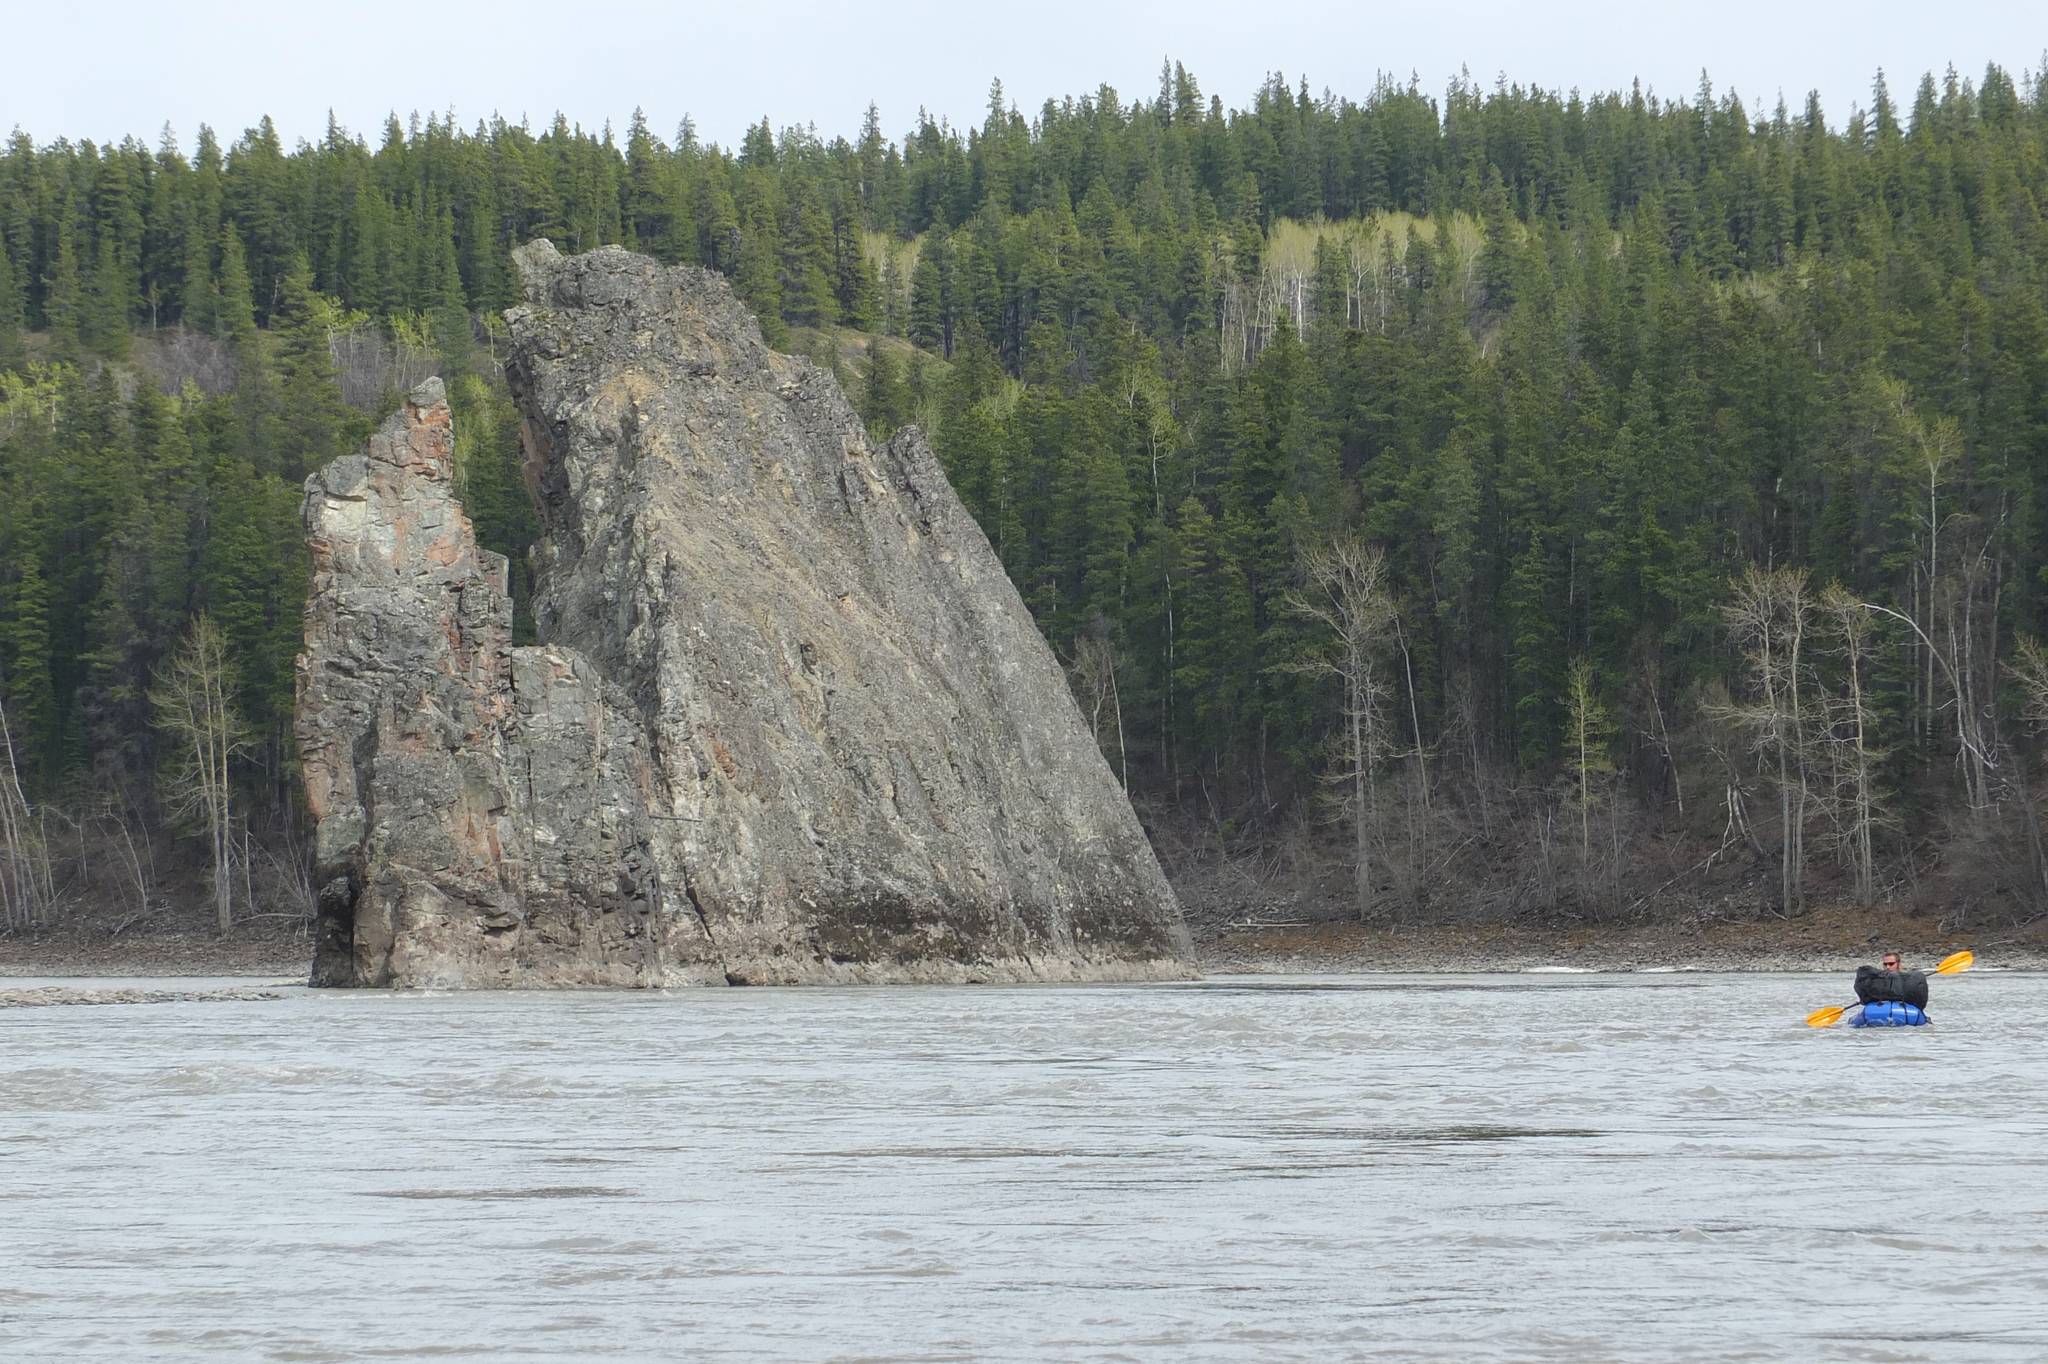 Bjorn Dihle paddles past one of the rock formations known as the “three sisters” just a few miles downstream from Telegraph Creek. (Courtesy Photo / Mary Catharine Martin)